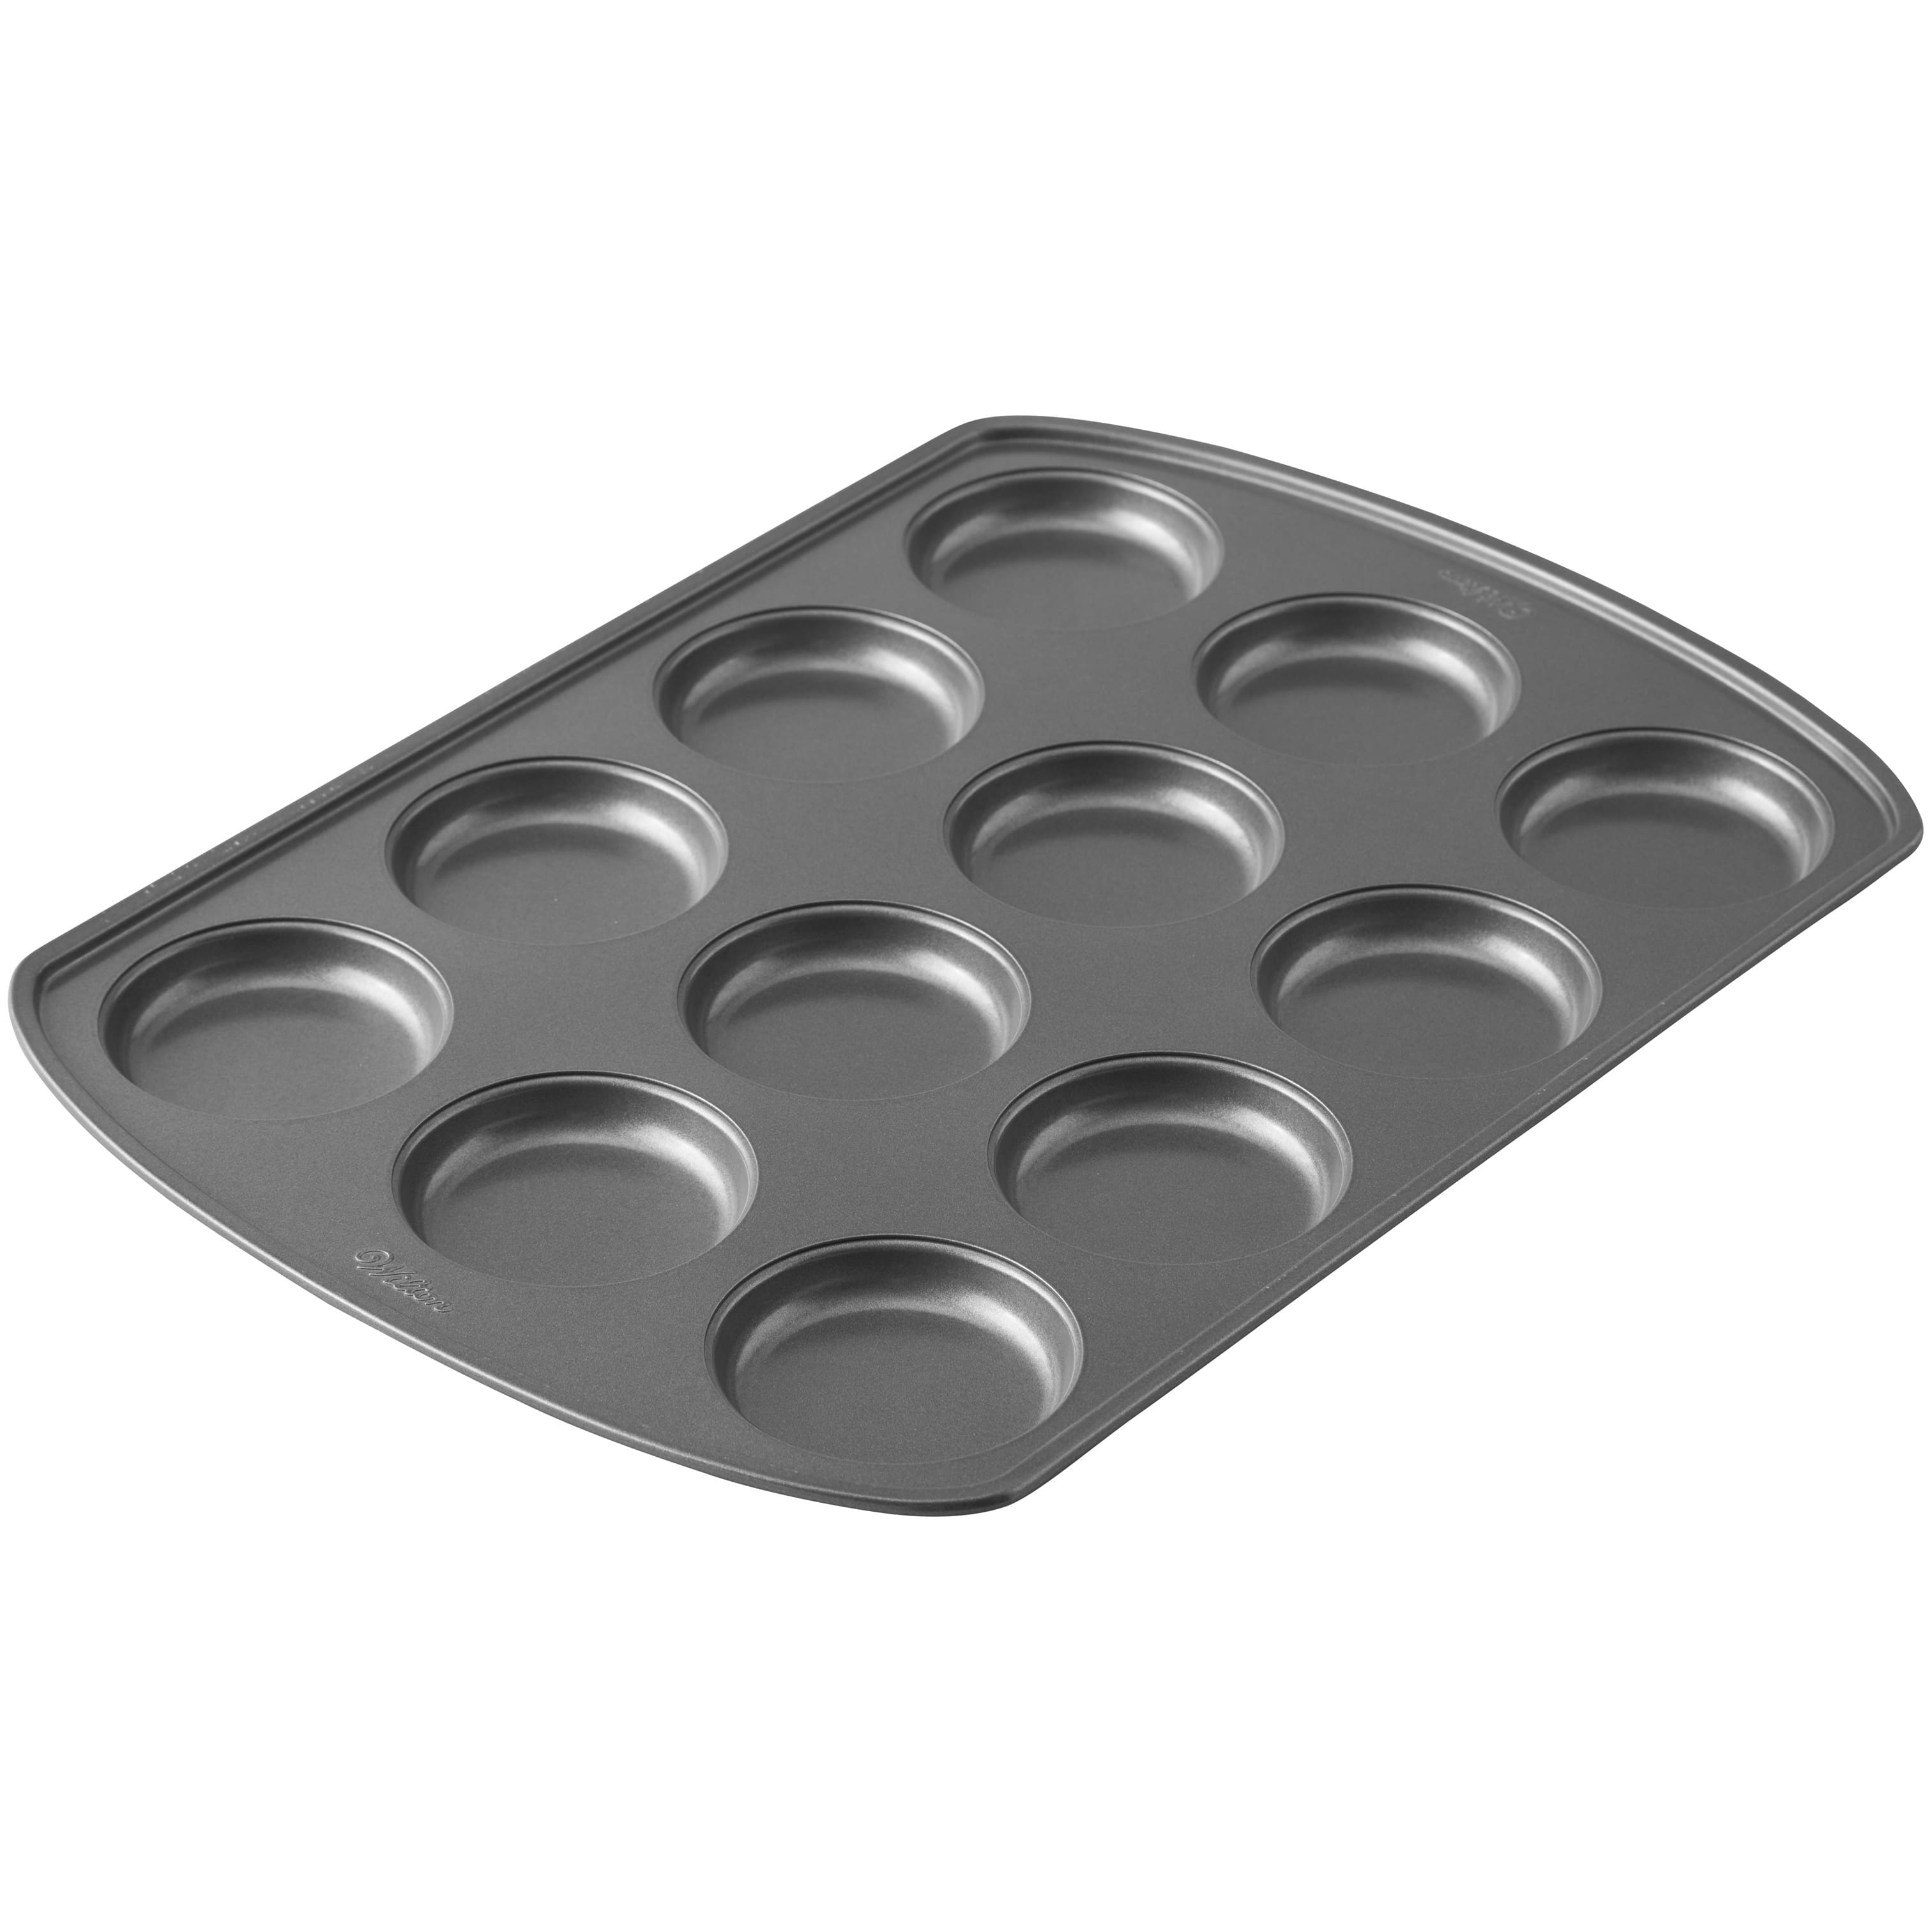 Puffy Muffin Top Pan Makes 6 Non Stick High Rise Crown 4"